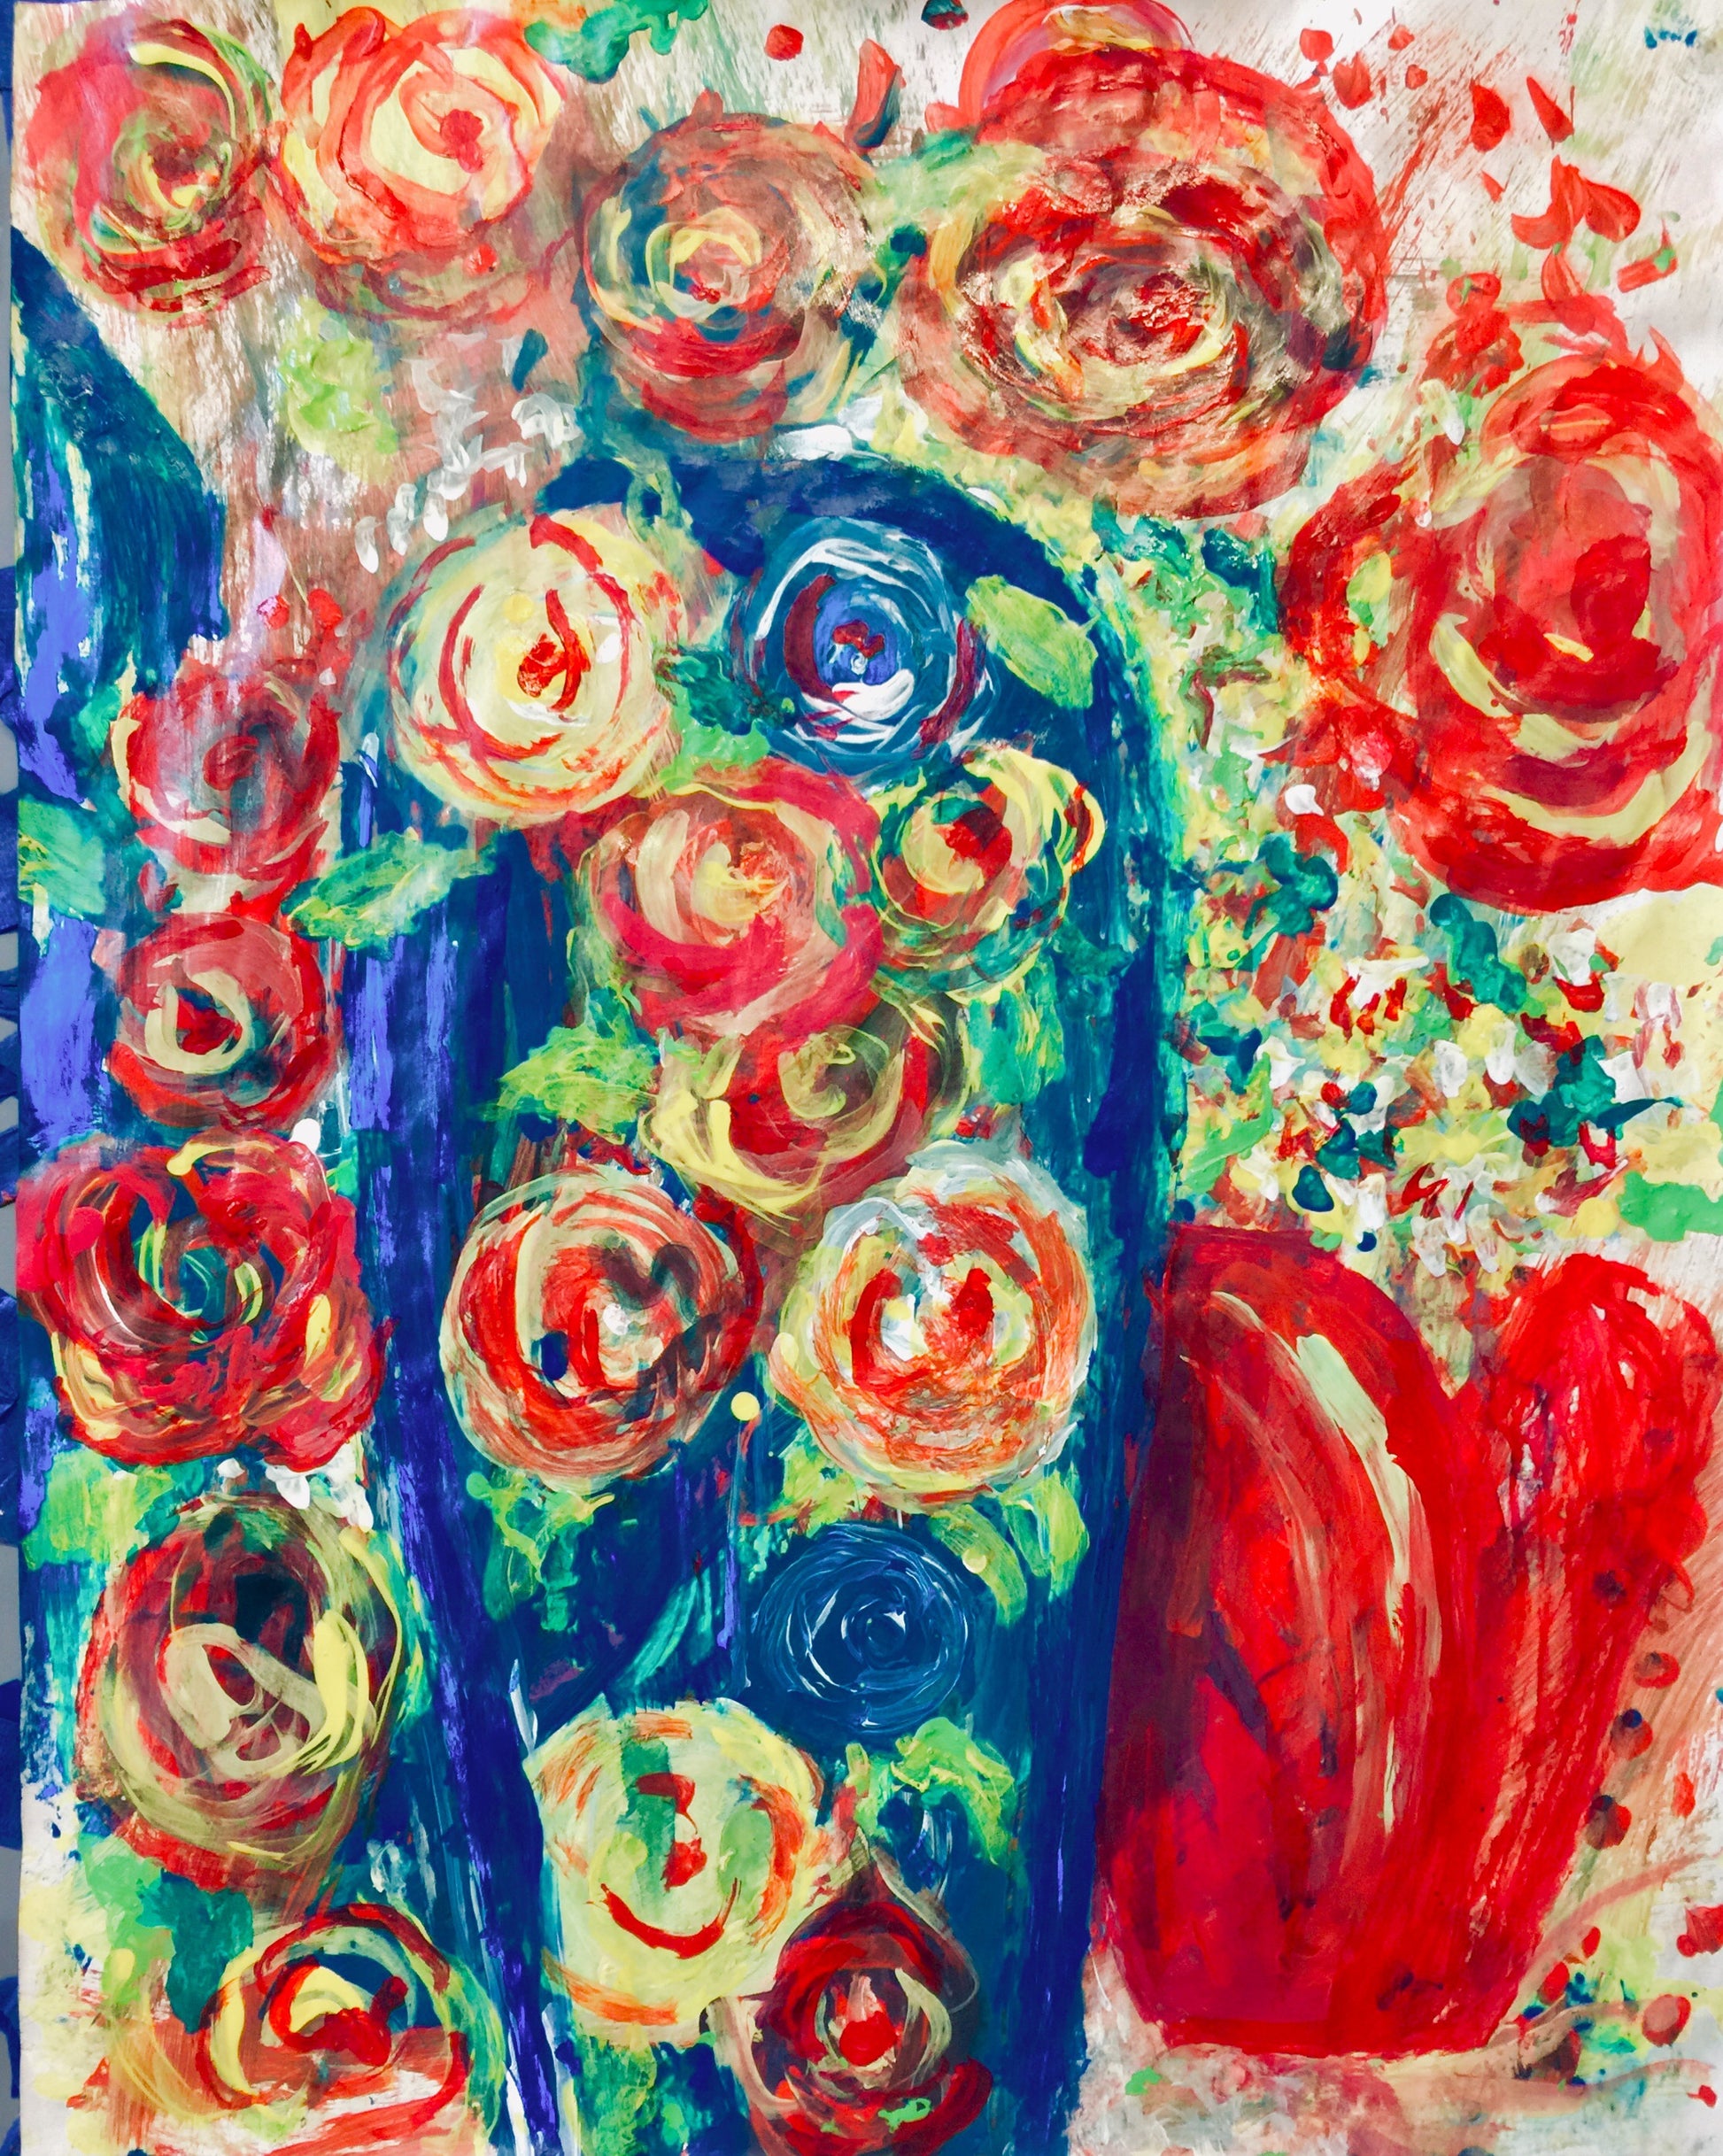 Gole Khoneh - Sonarta.com Roses, Roses everywhere. Gole Khoneh is where you place your roses.  This is an Acrylic on Paper painting by artist Shahla Rahimi Reynolds.  Gole Khoneh is 24” H X 19” W.